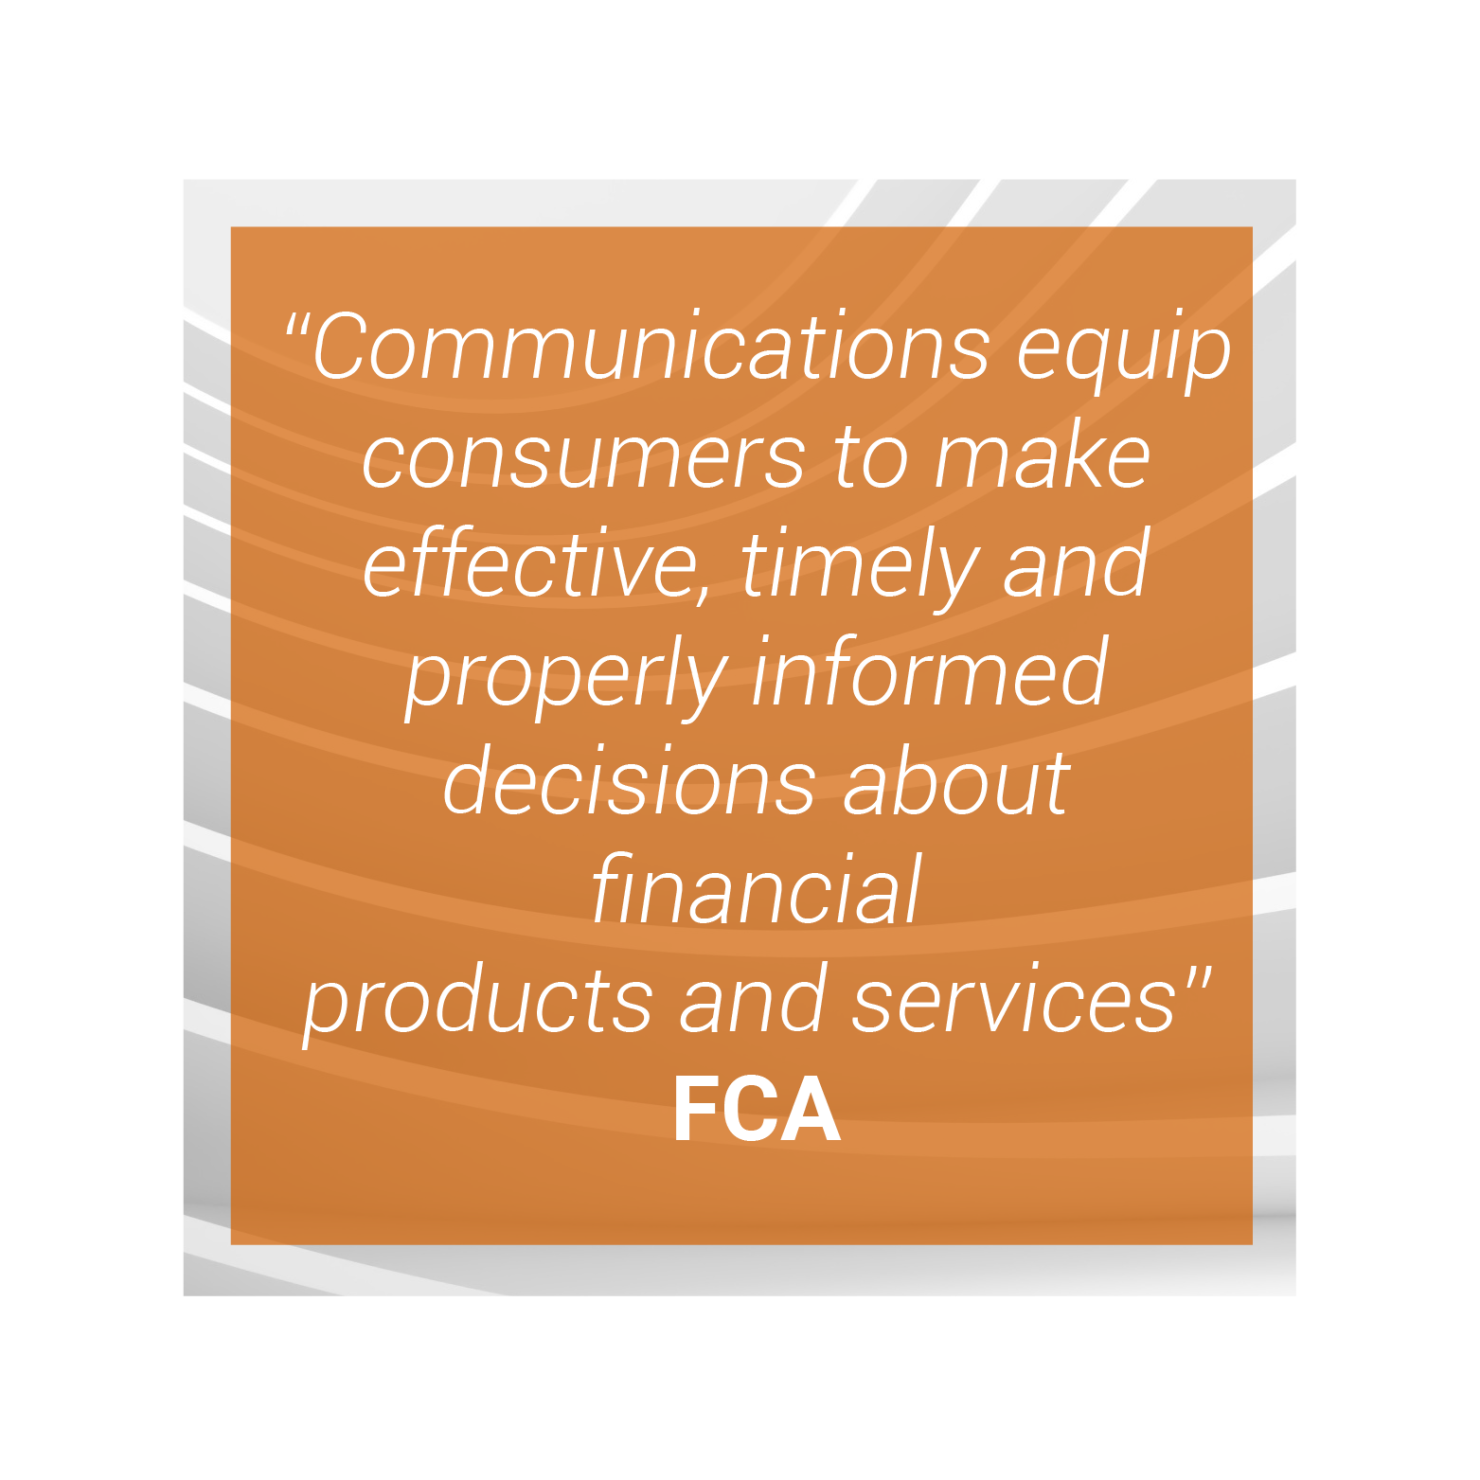 "Communications equip consumers to make effective, timely and properly informed decisions about financial products and services" - FCA